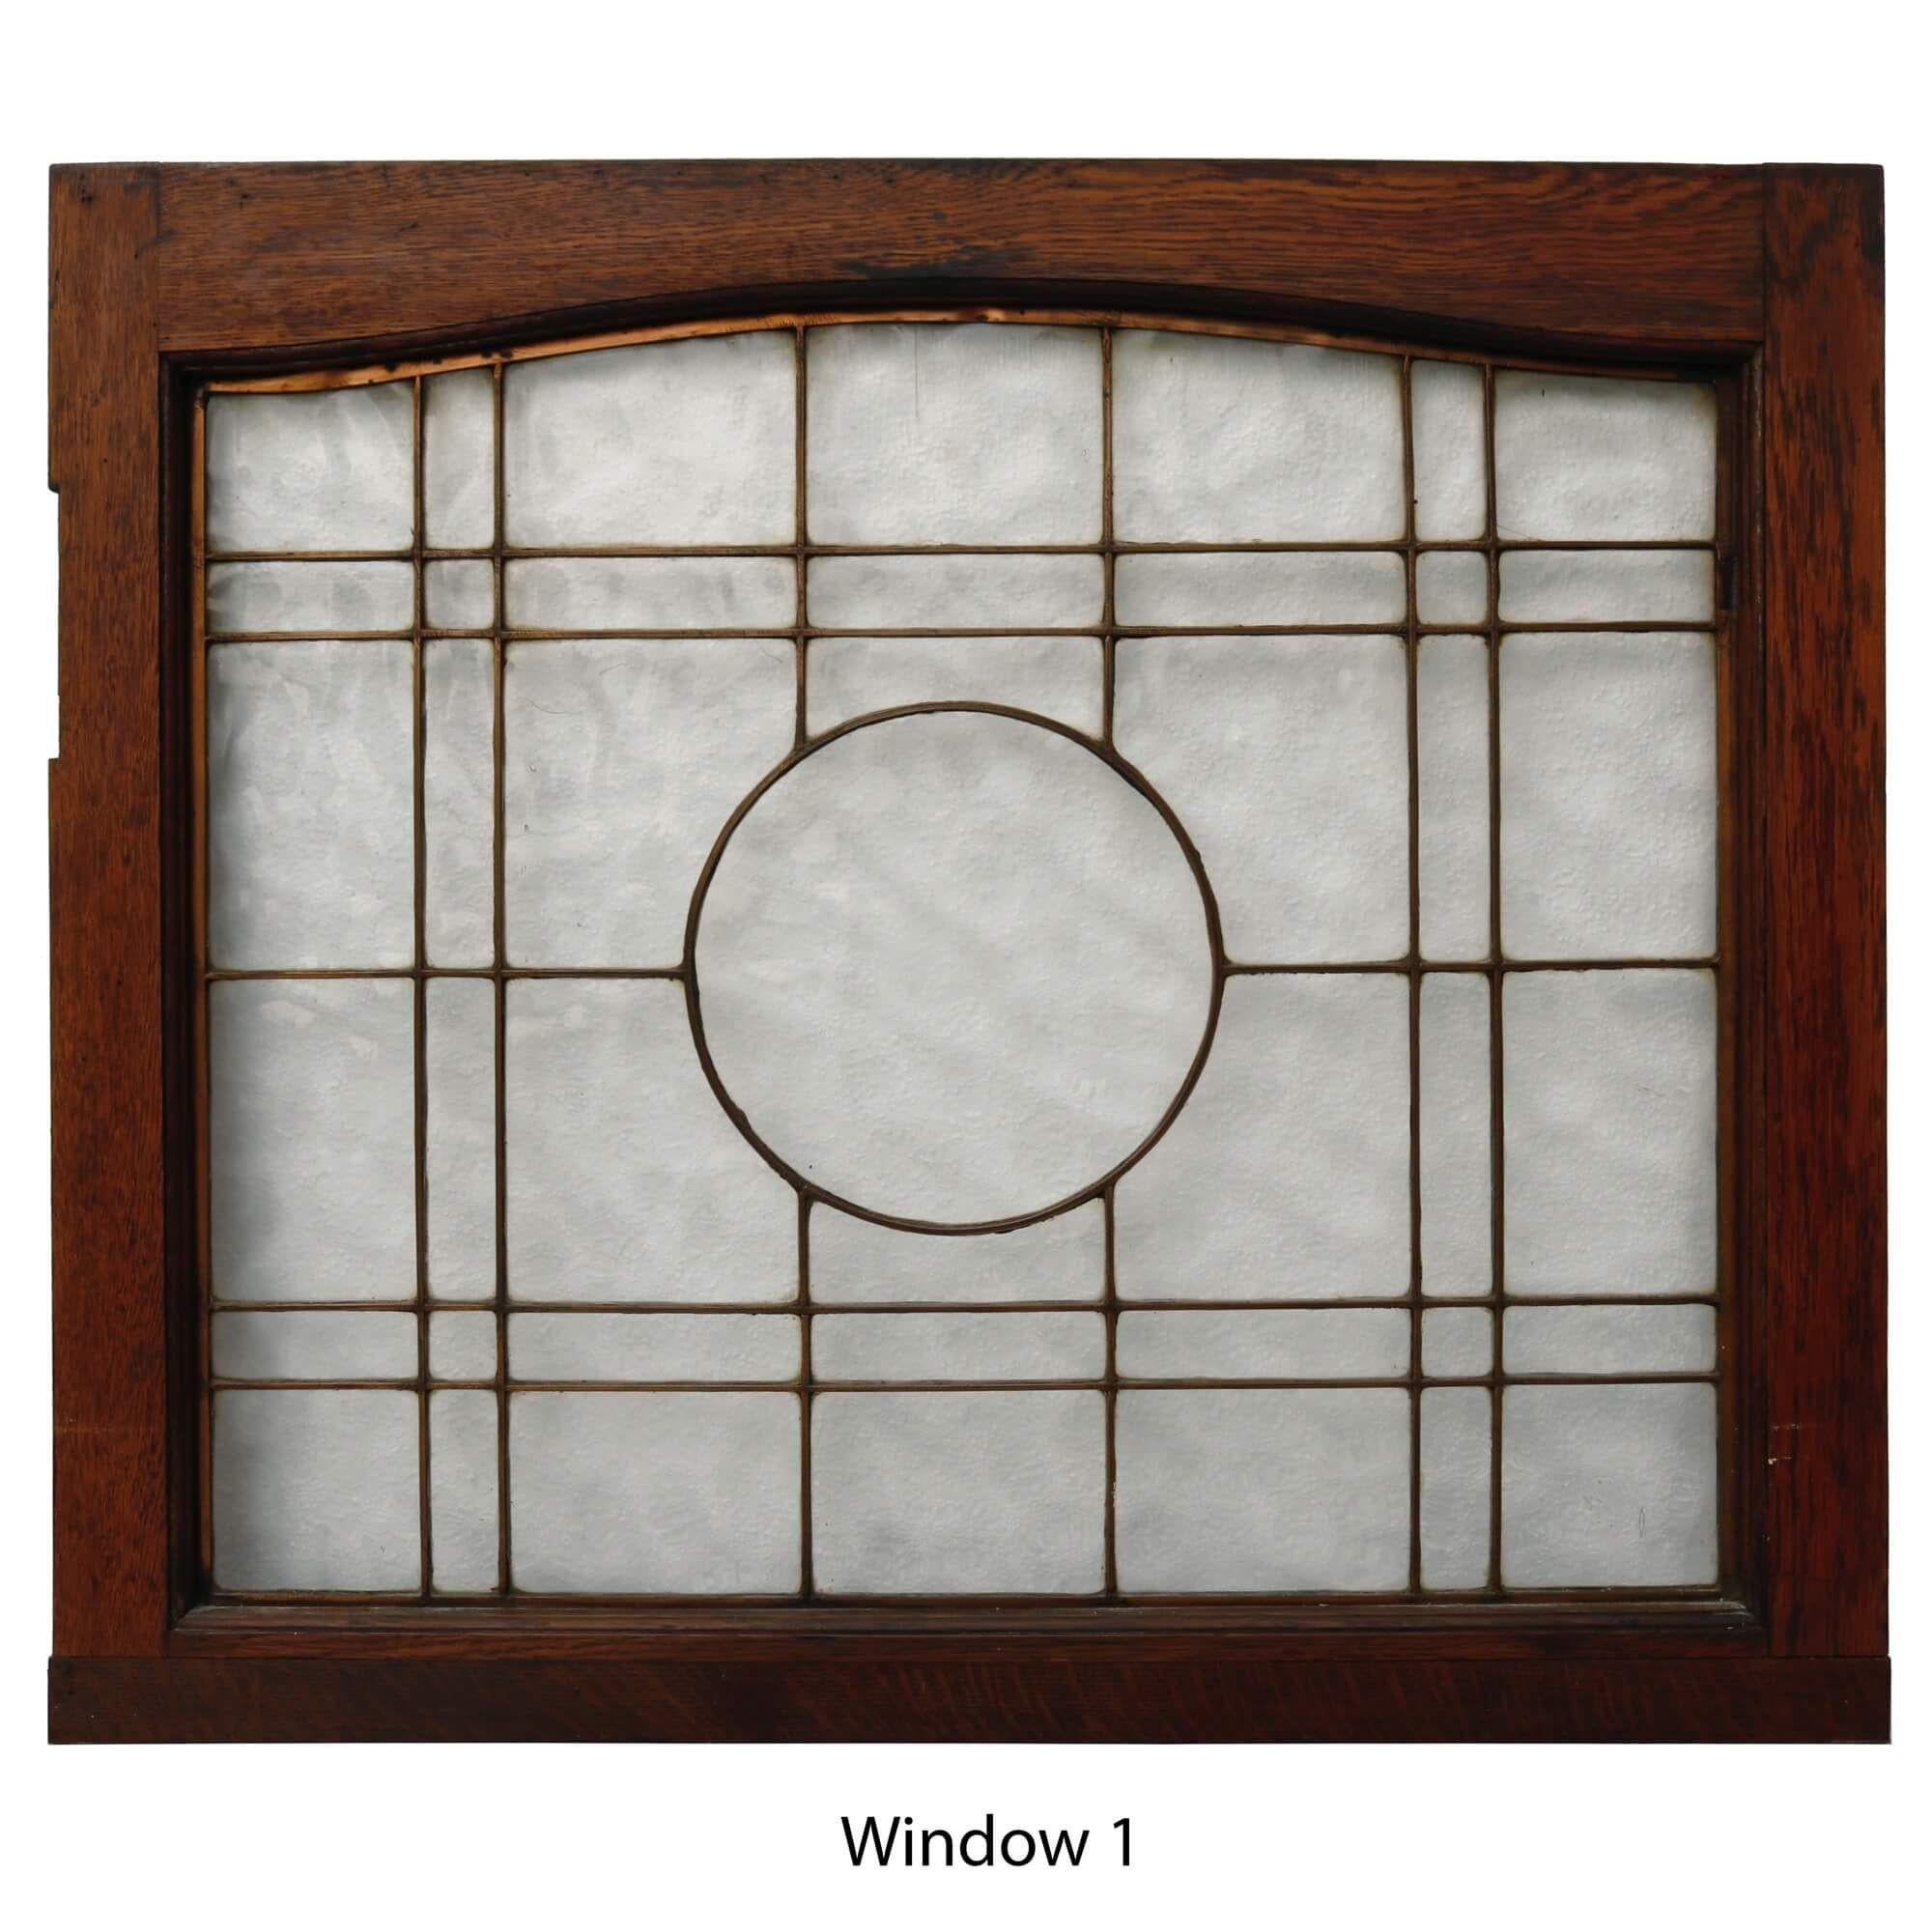 A smart set of 4 matching reclaimed copperlight windows dating from the early 1900s. Each window comprises of an oak frame with clear textured glass and copperlight glazing centring around a circular pane to the centre. At over 110 years old, these